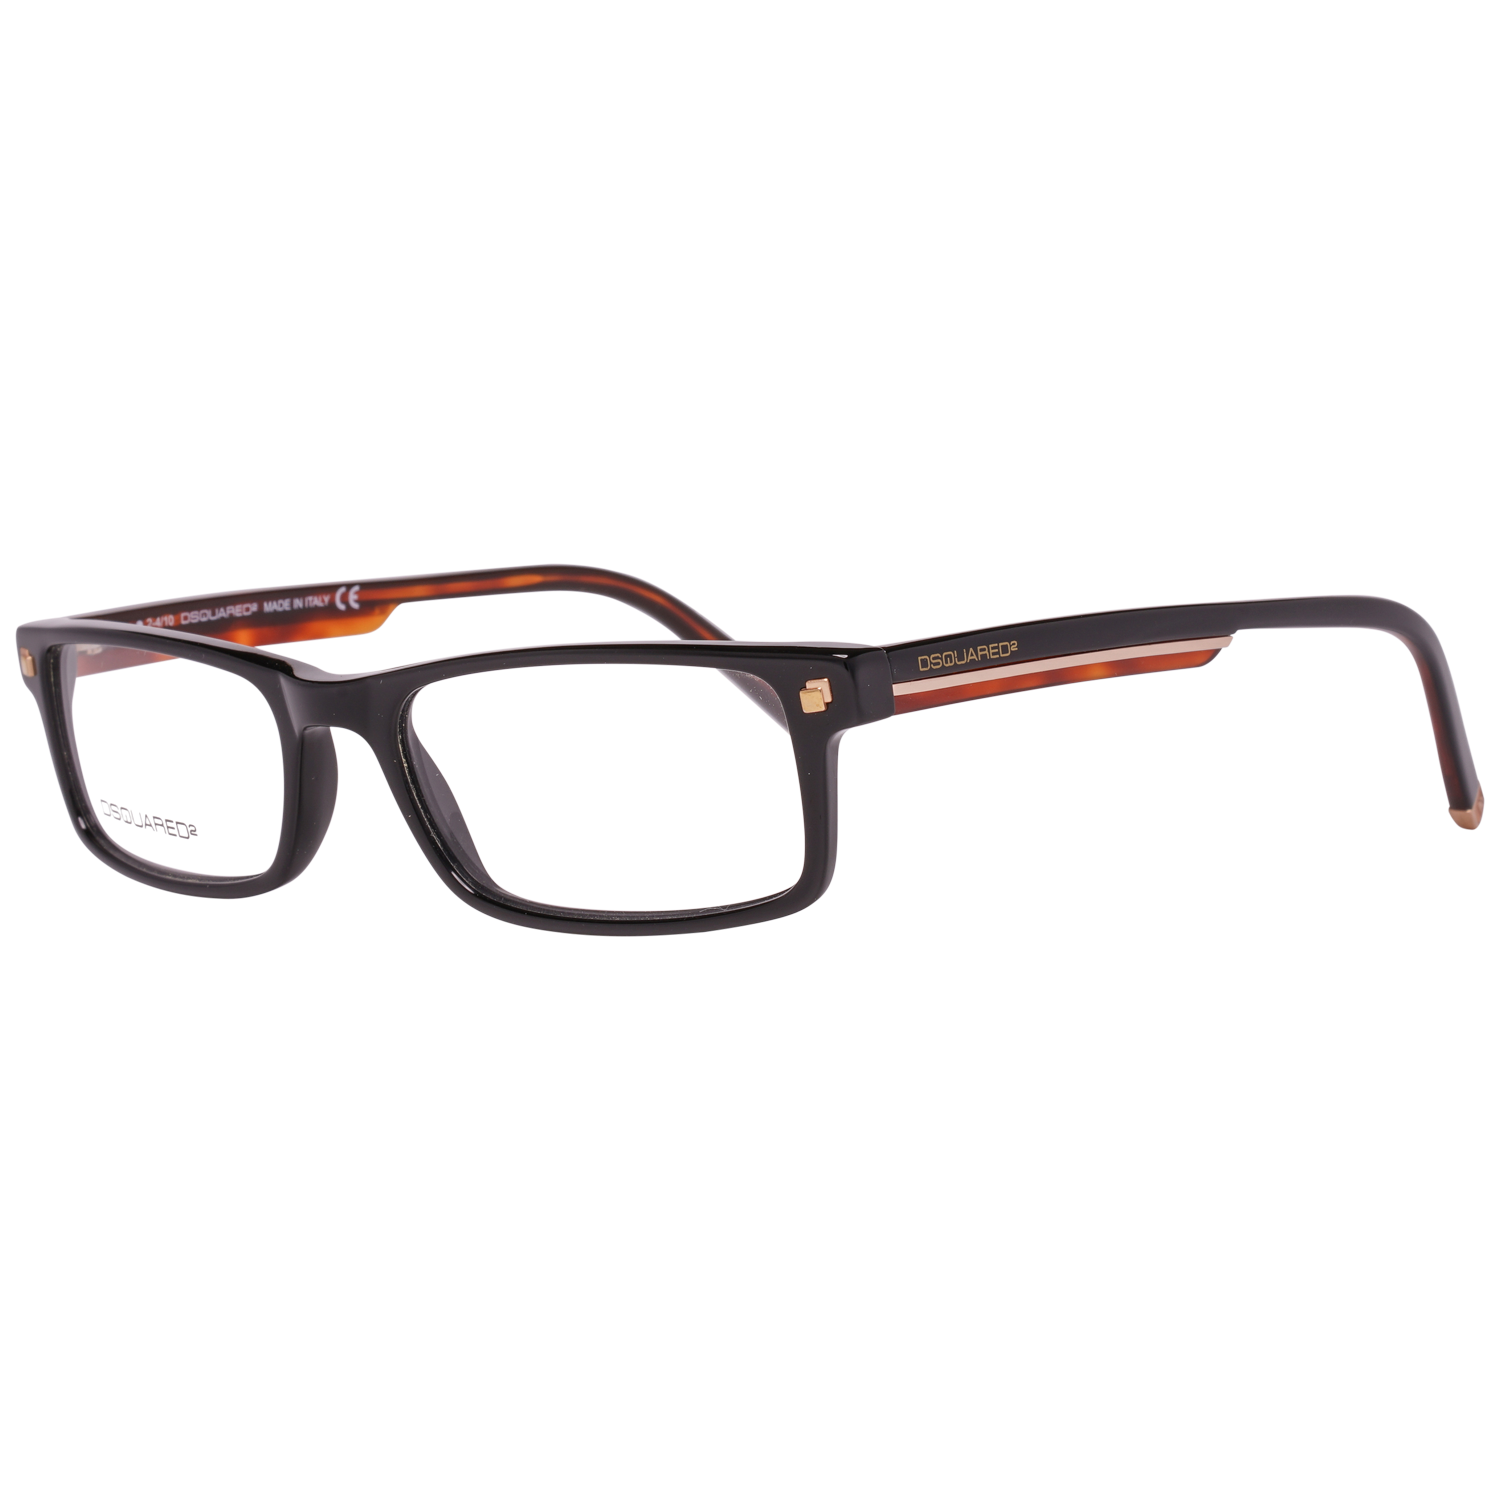 Dsquared2 Optical Frame DQ5035 001 53